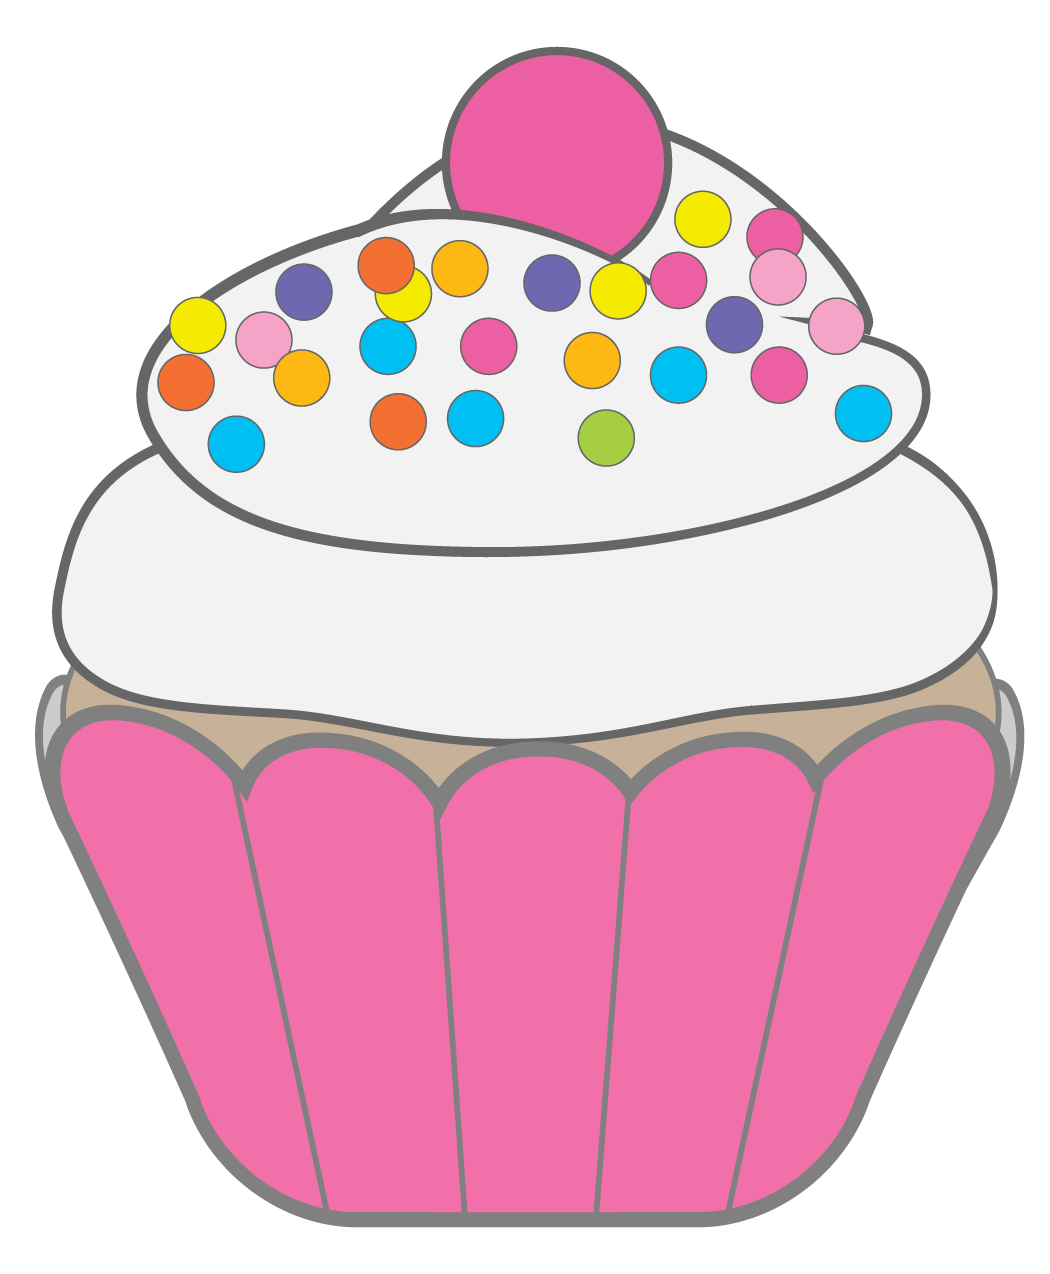 Cupcake Png - ClipArt Best